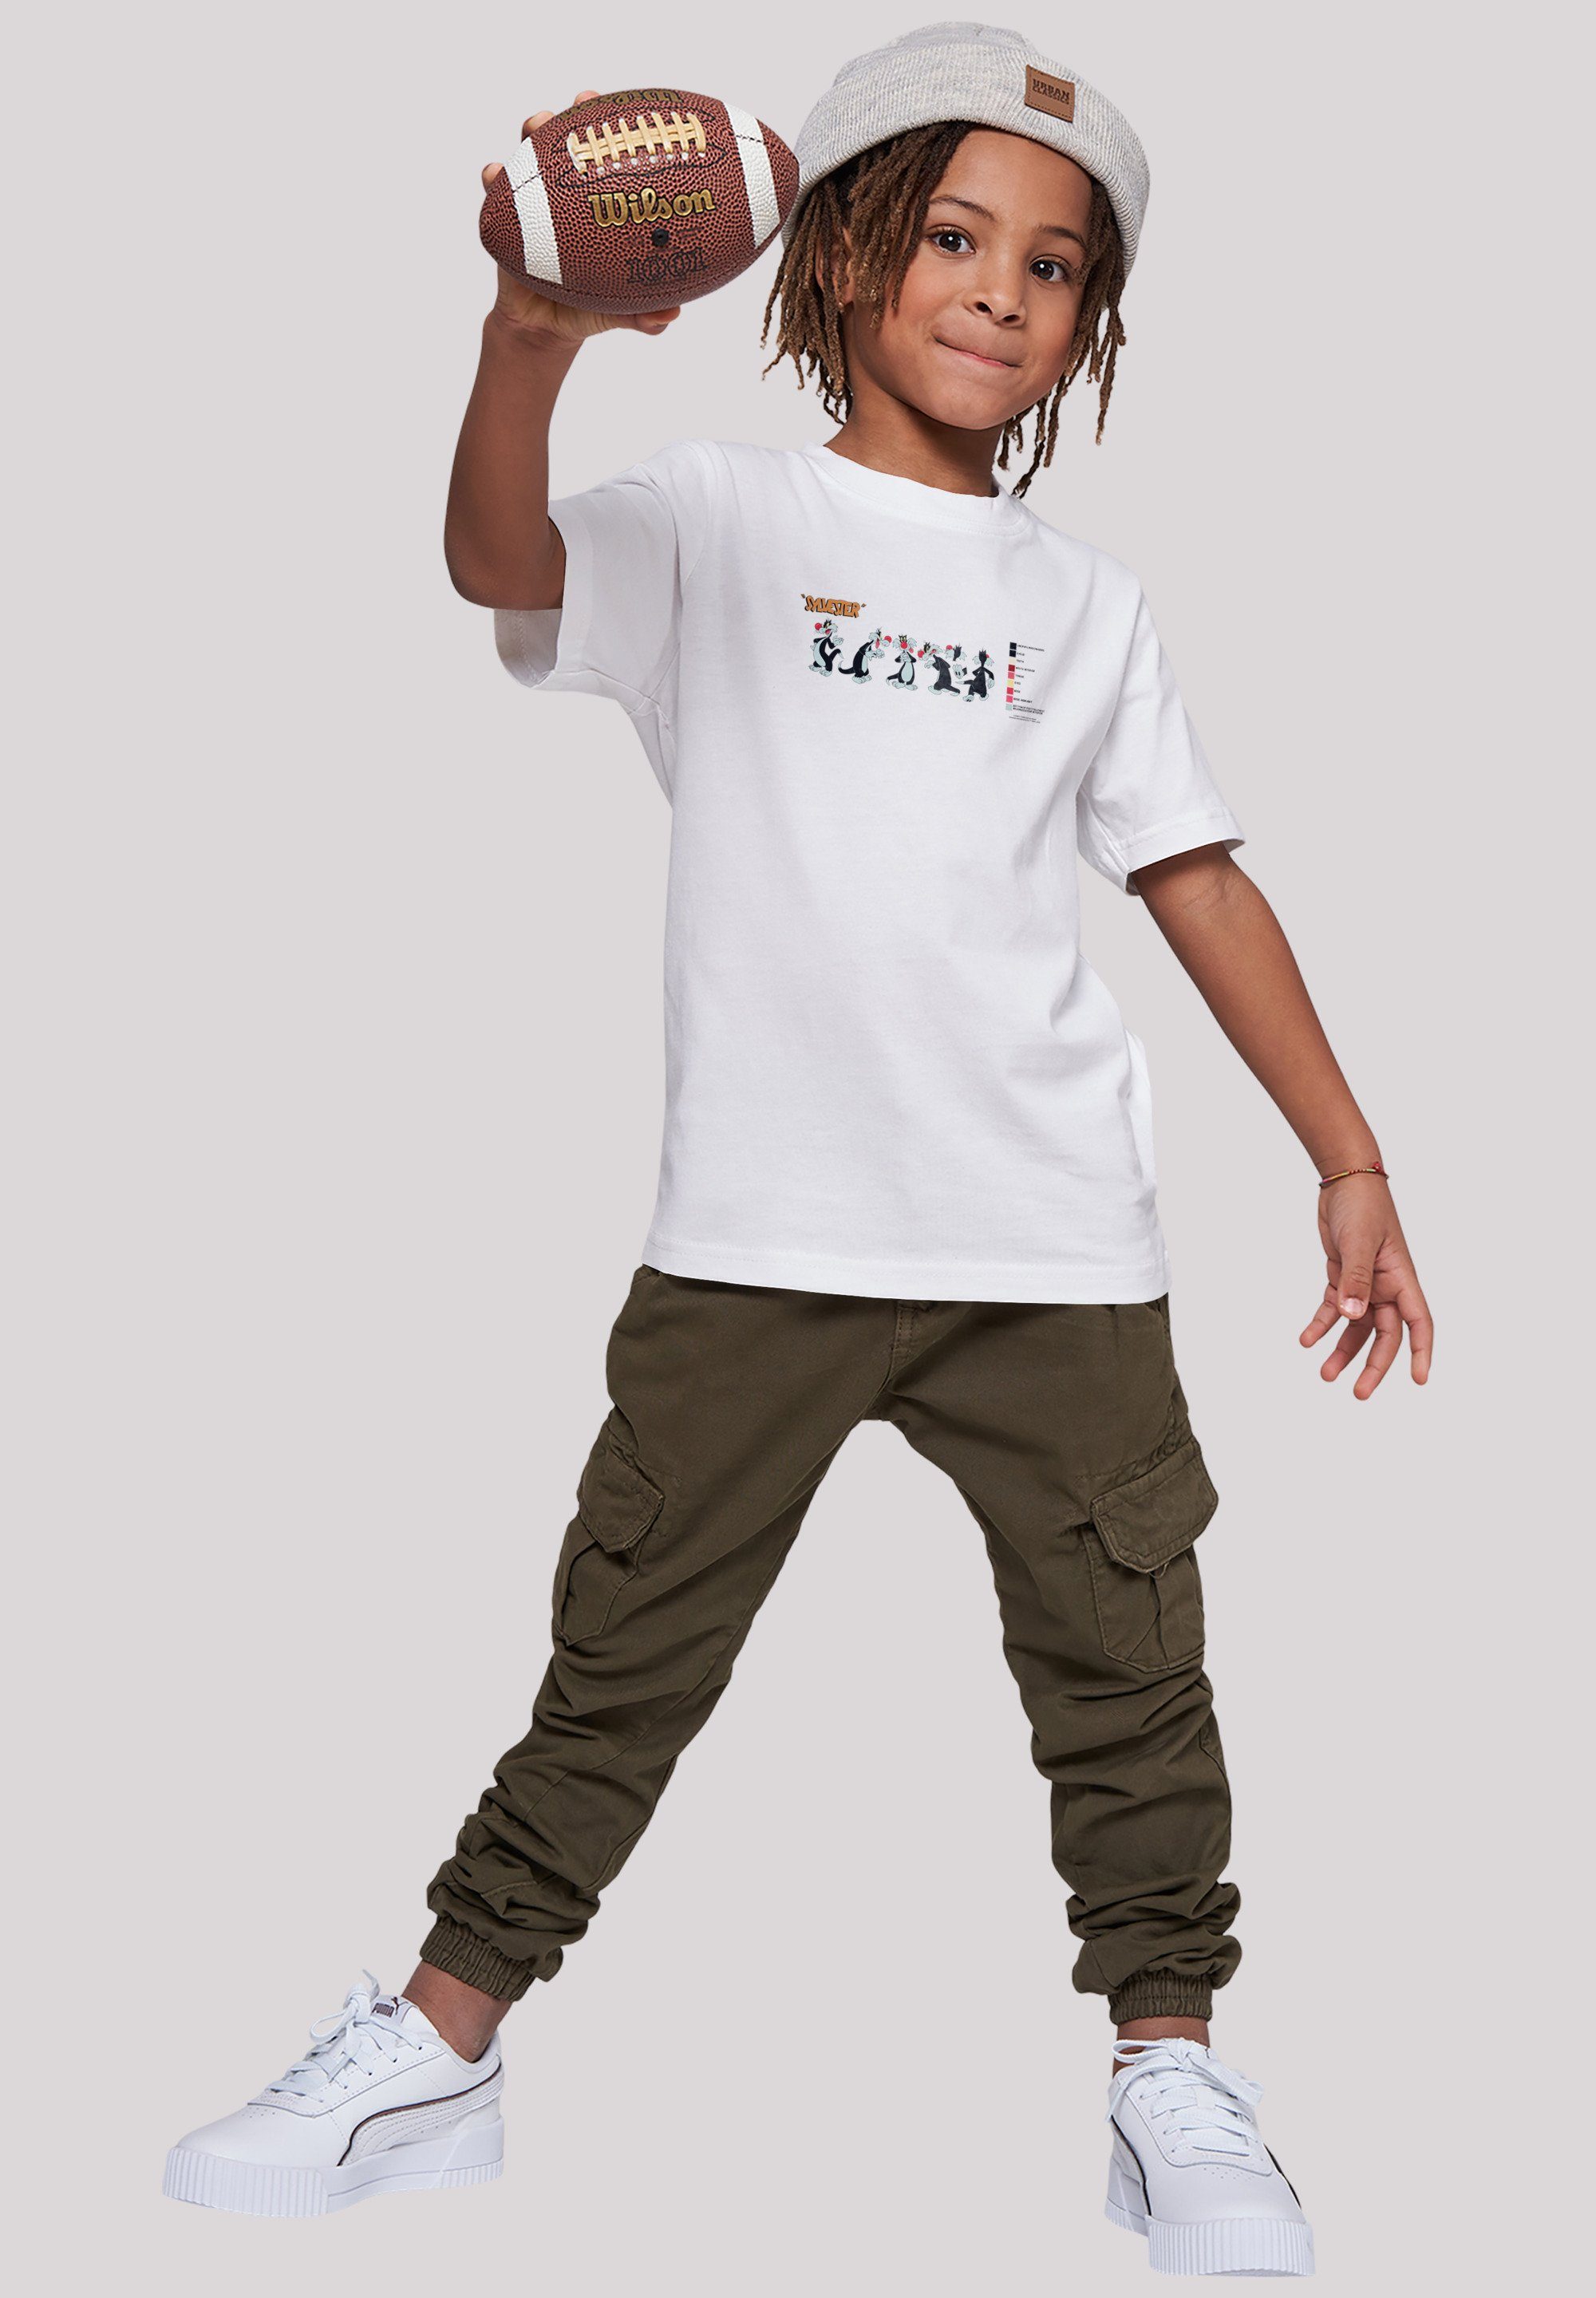 Sylvester (1-tlg) Kurzarmshirt Looney Basic Kinder Code F4NT4STIC with Colour Tunes Kids Tee